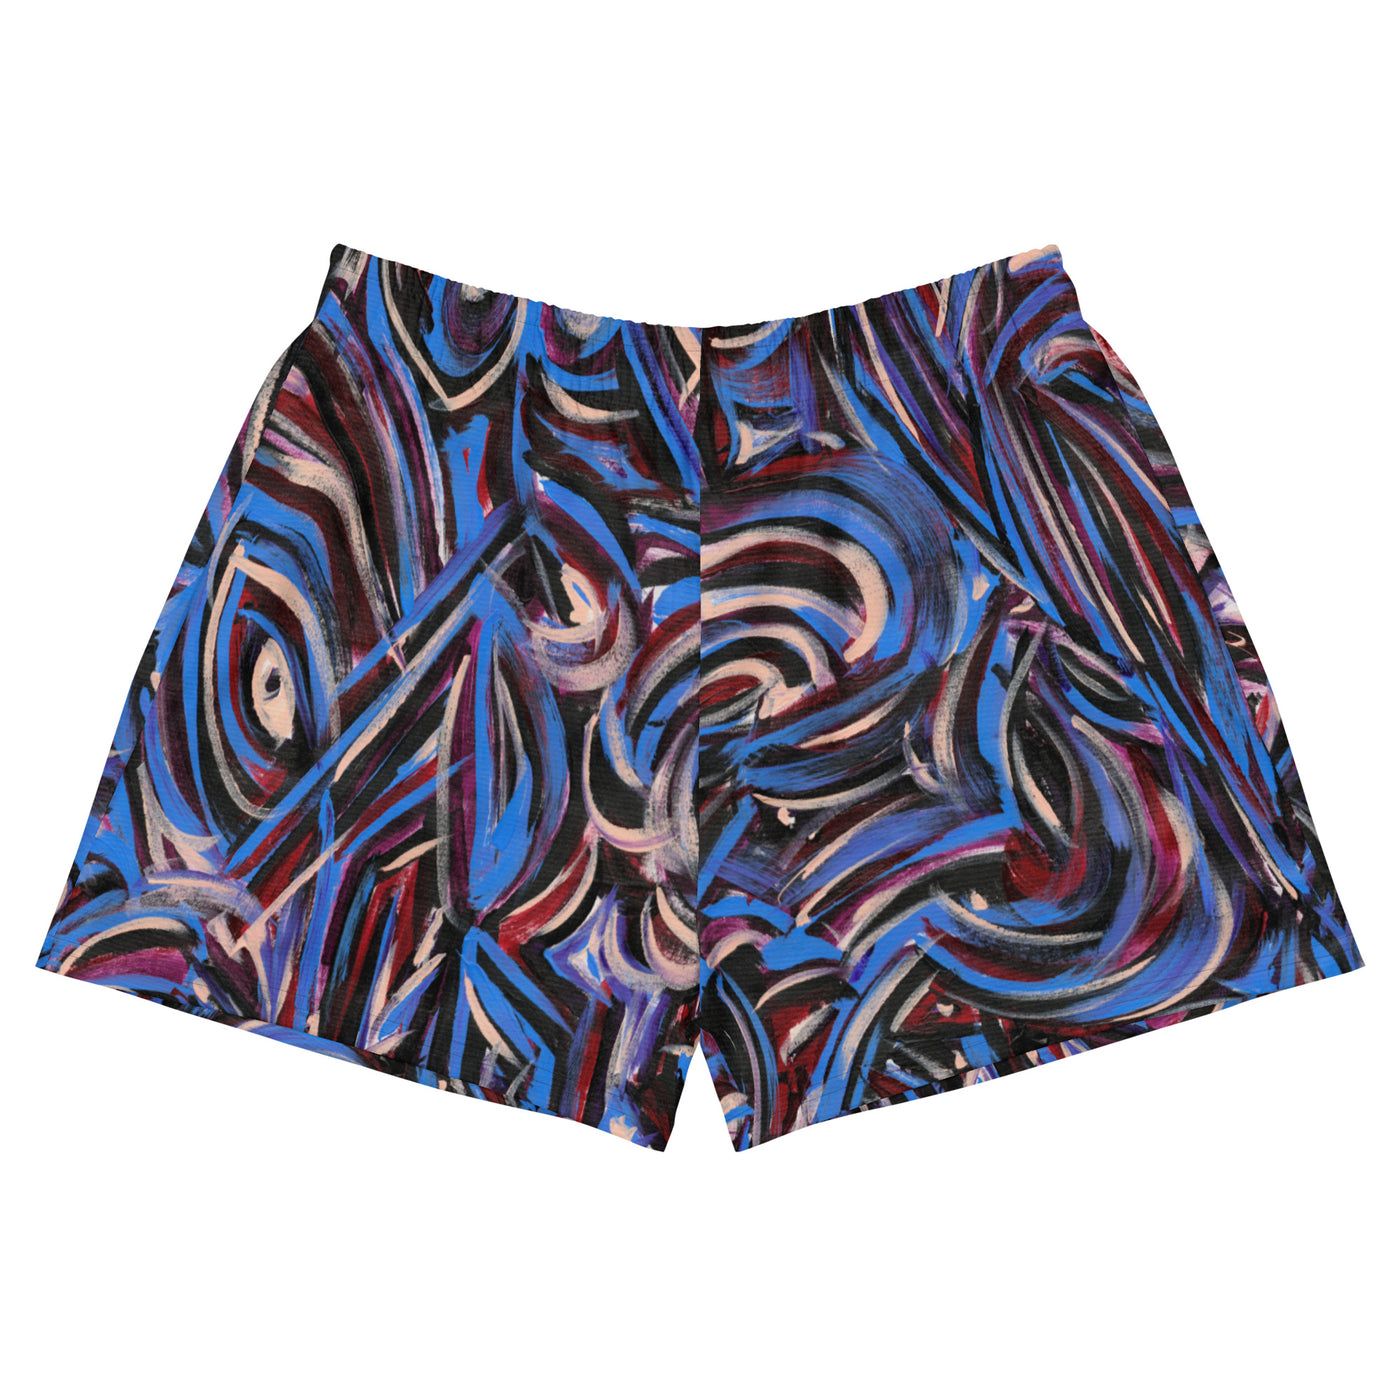 Sapphire Art Recycled Athletic Shorts